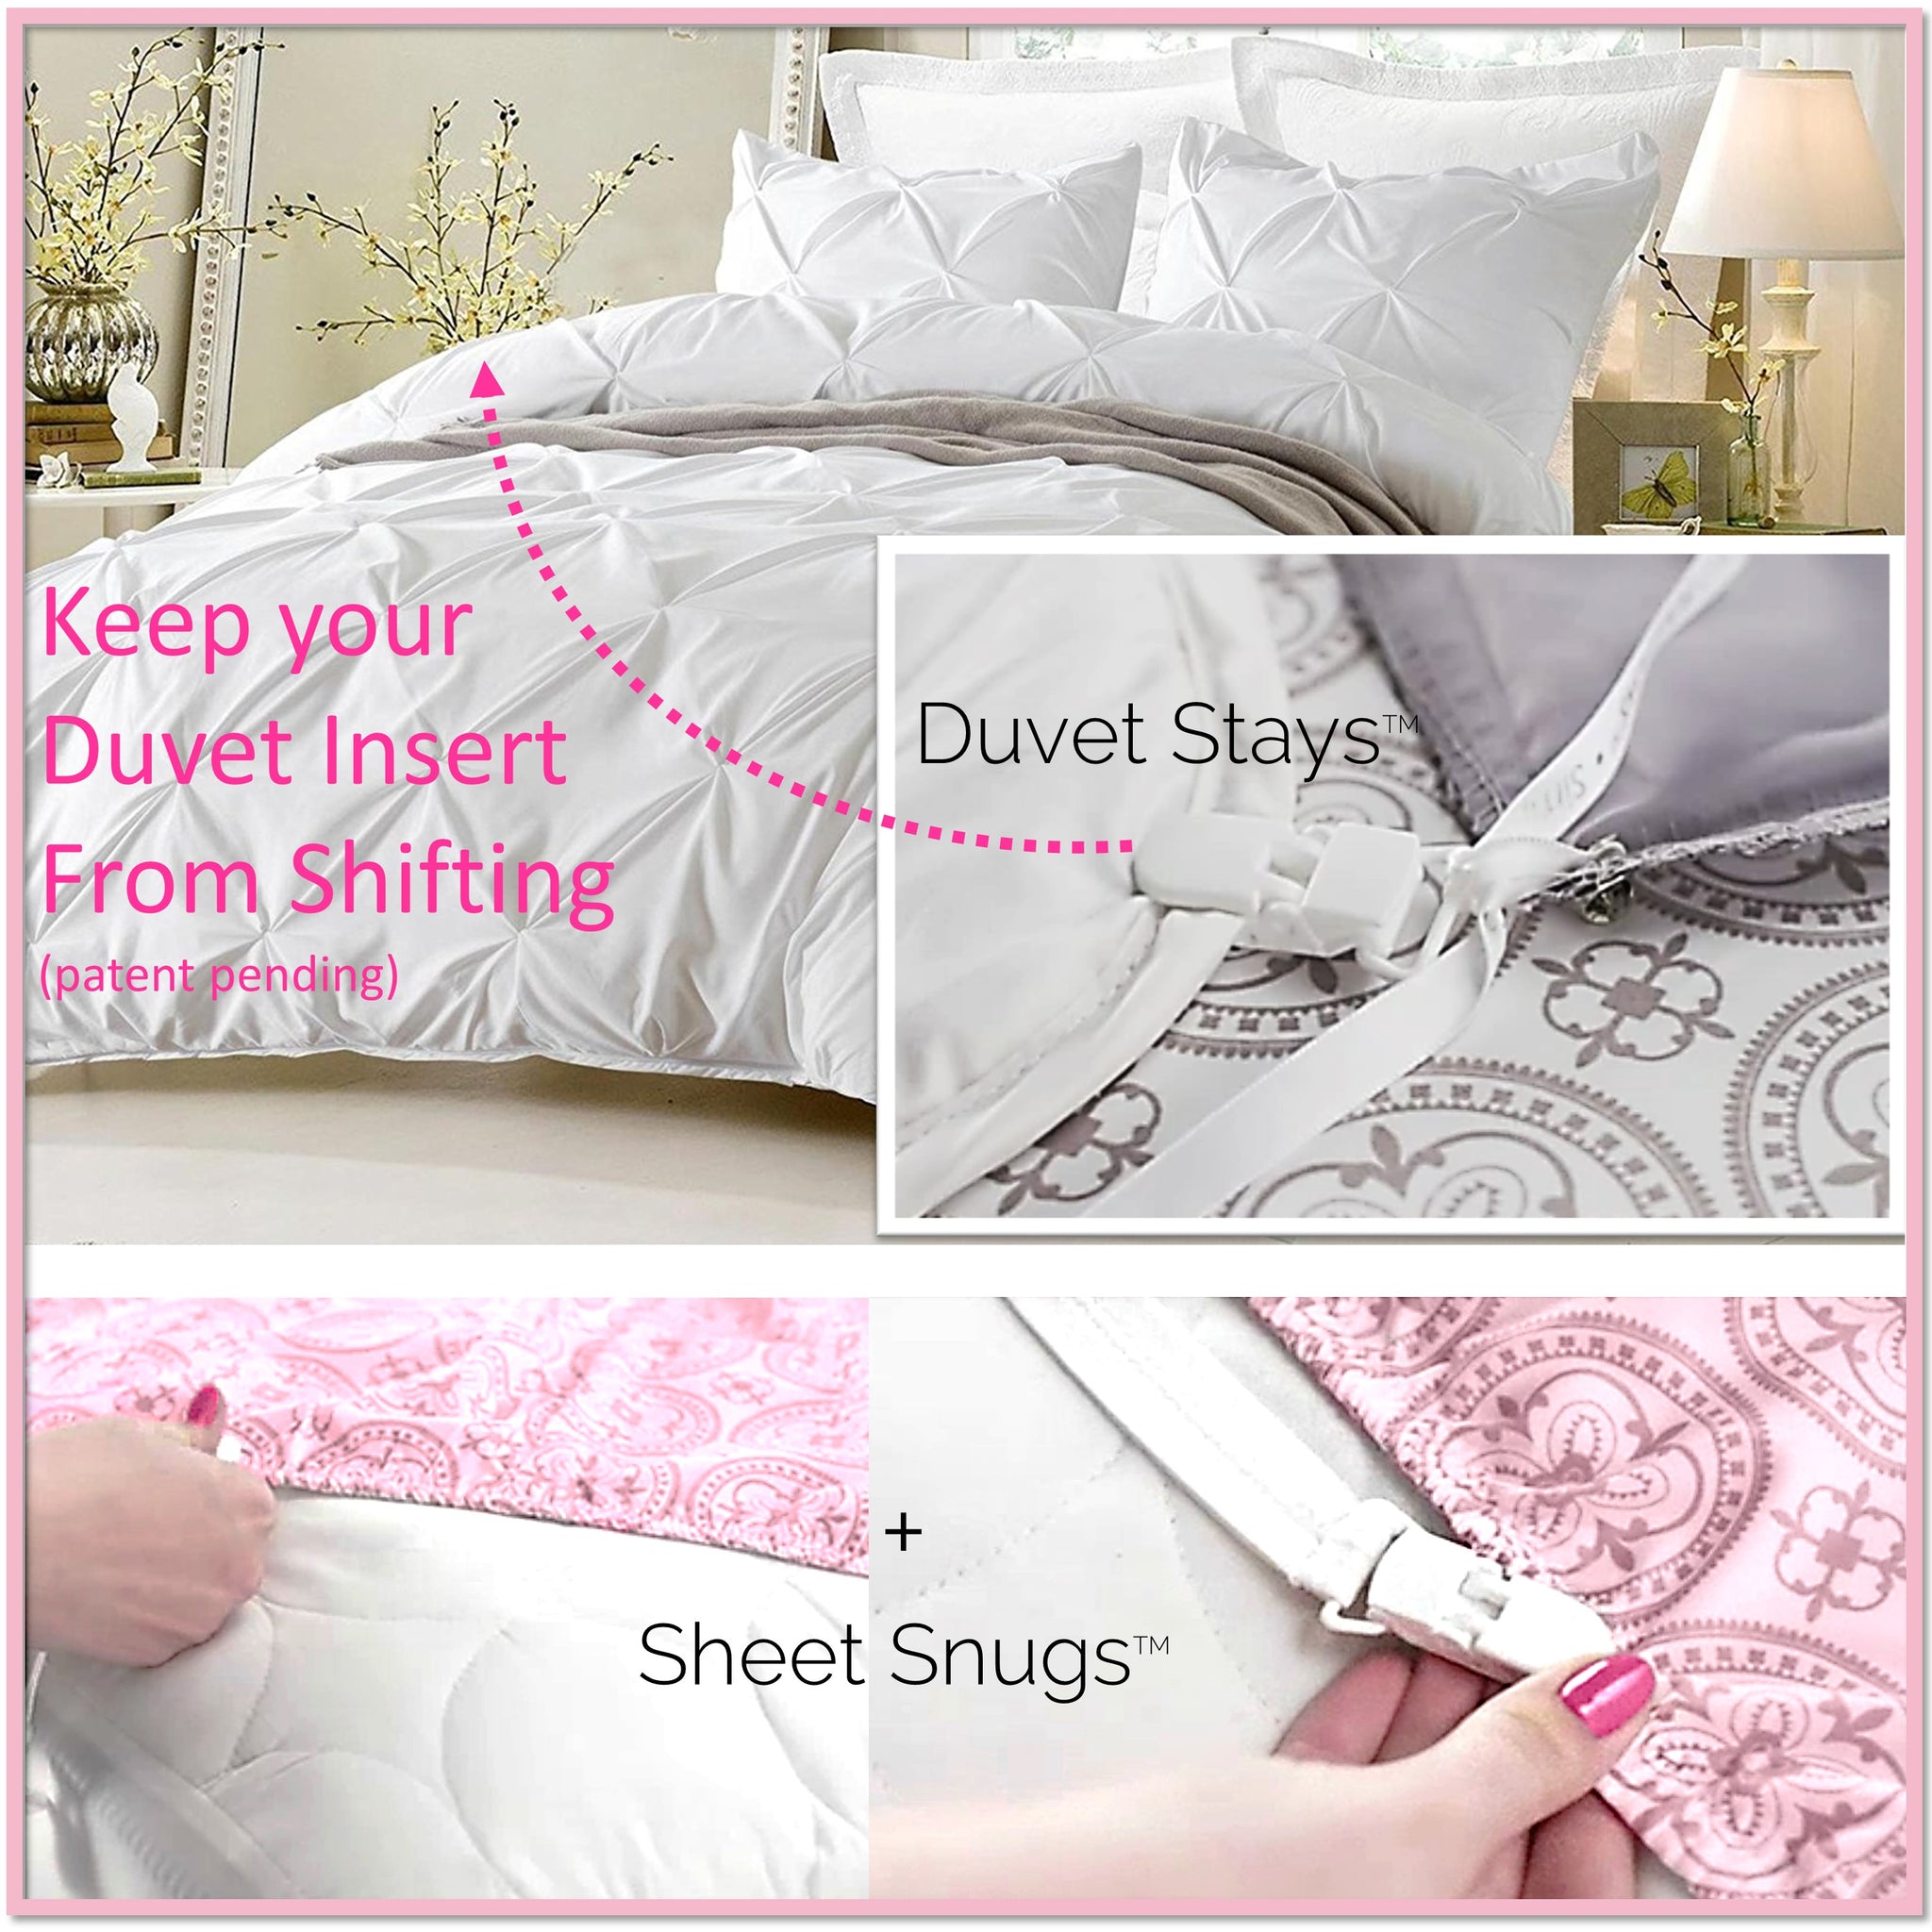 Duvet Stays And Sheet Snugs The Complete Sleep Tight Bedding